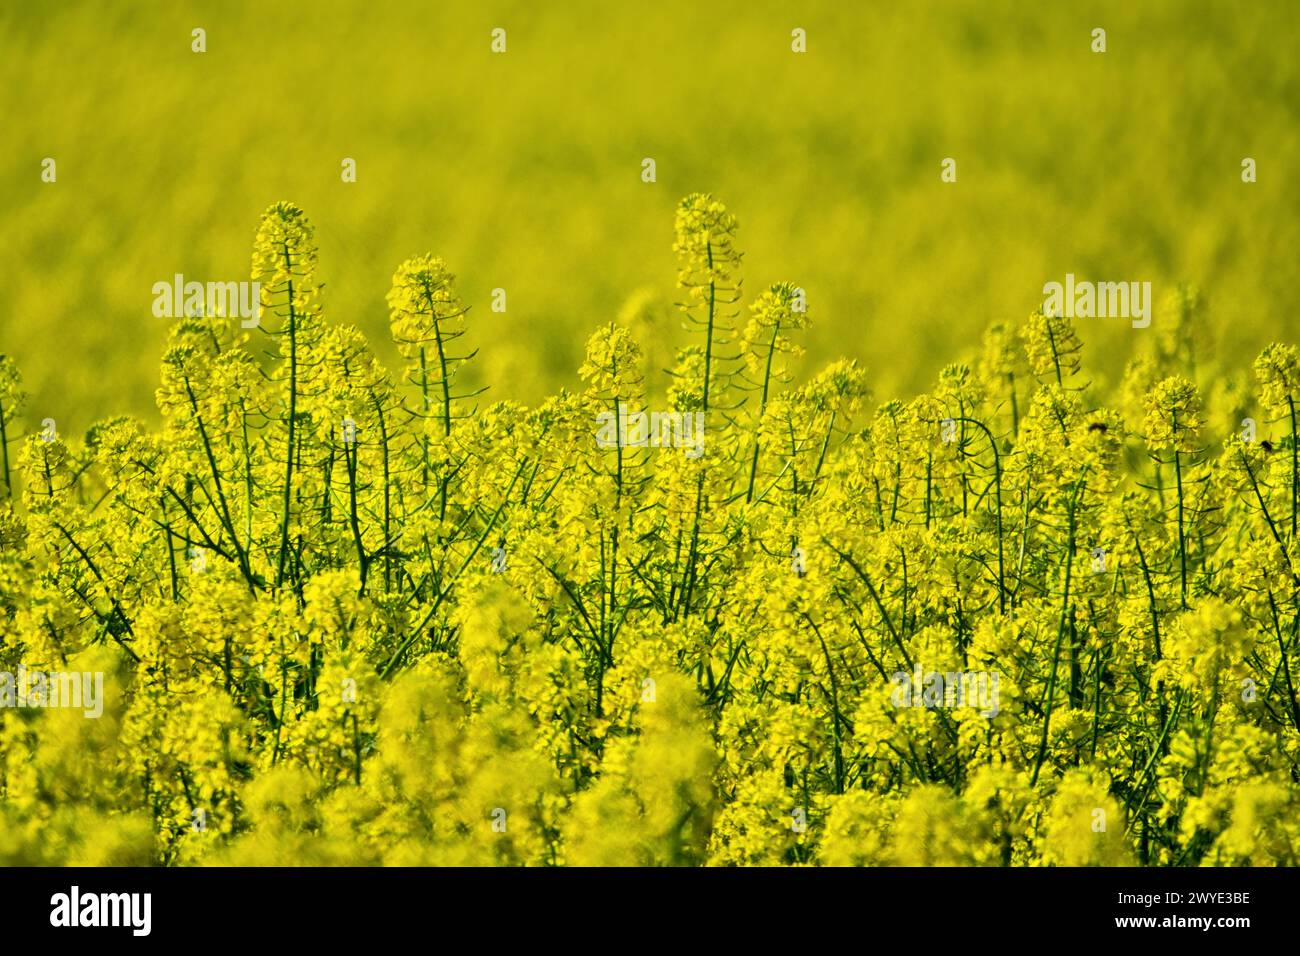 Yellow fields of rapeseed colza (Brassica napus var. oleifera), canola flowers on southern plains, former steppe Stock Photo